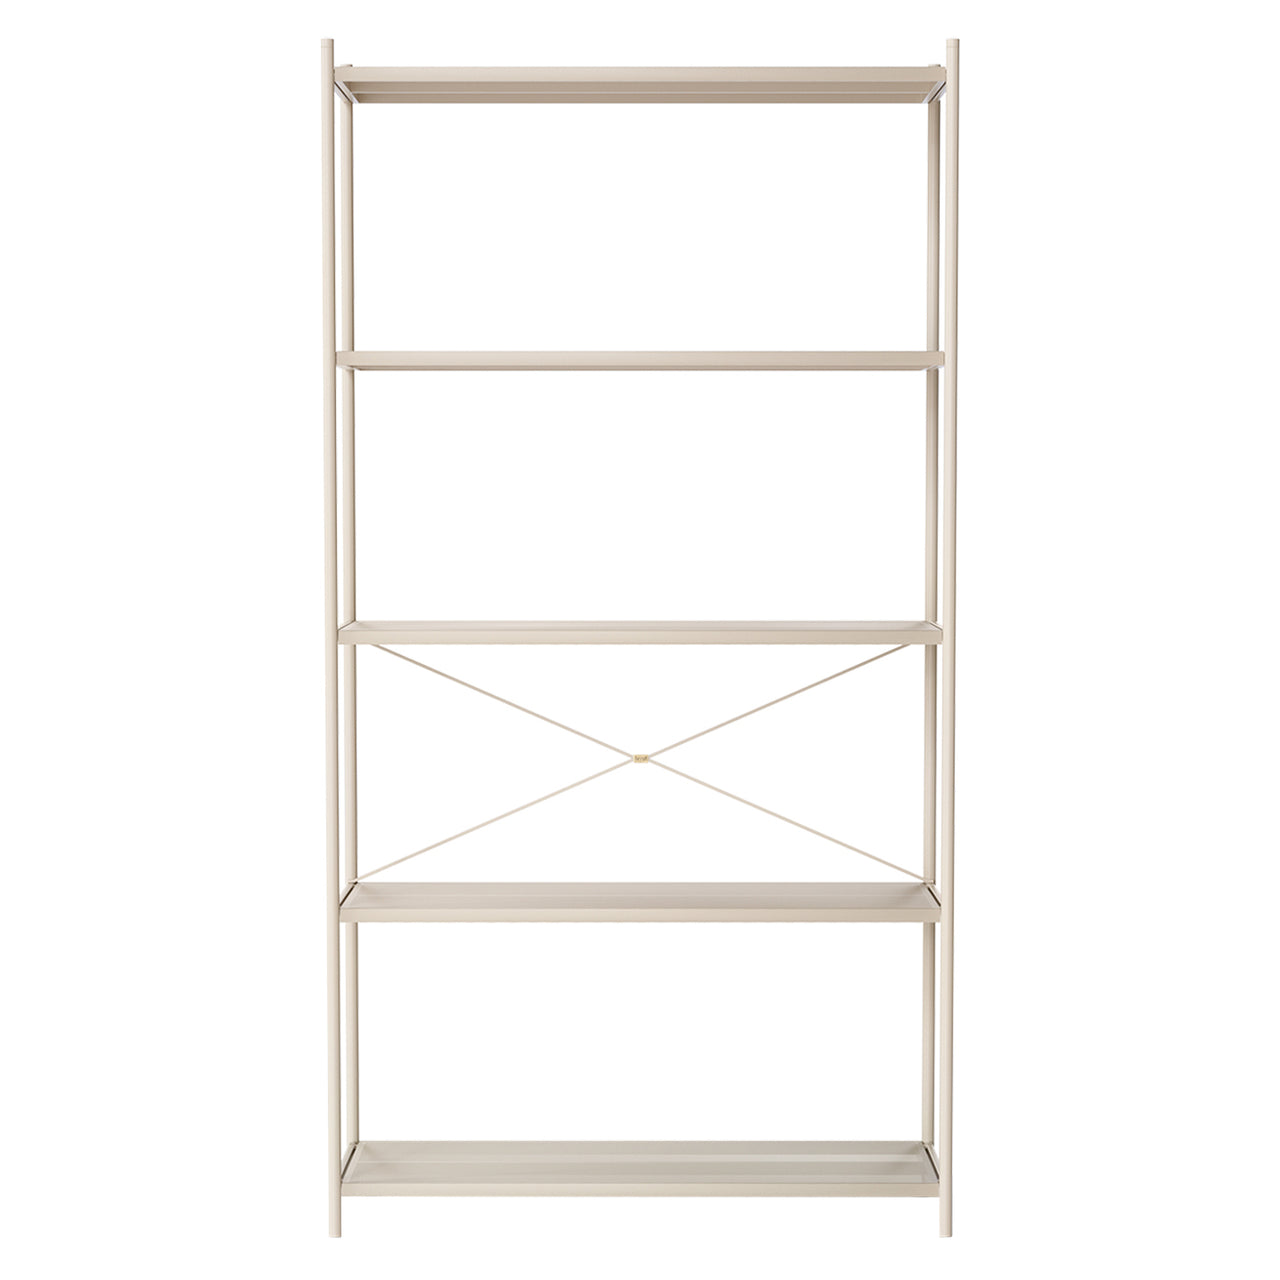 Punctual Shelving System: Configuration 4 + Cashmere (Perforated) + Cashmere